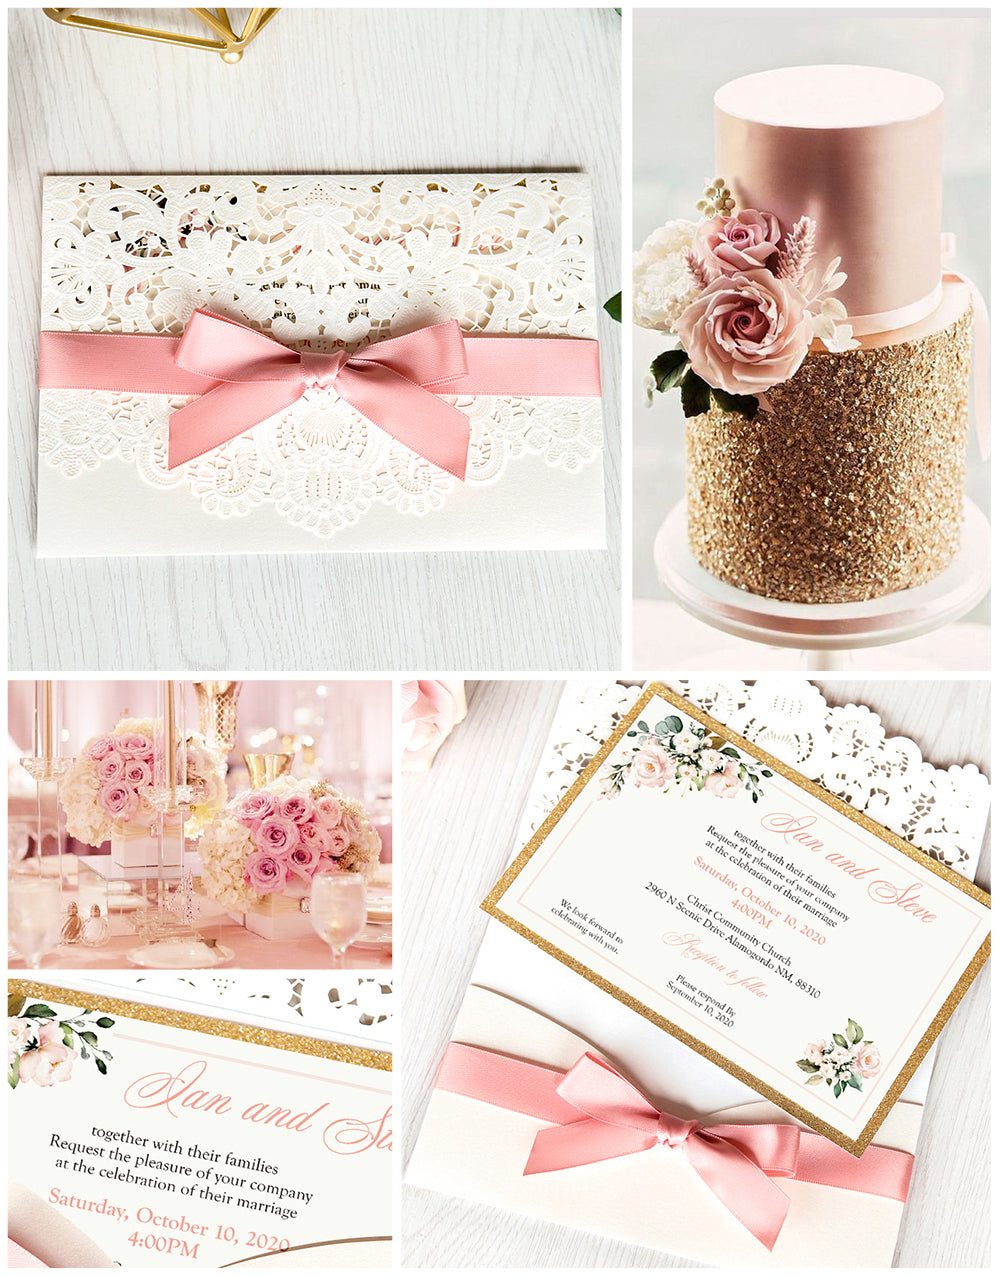 White Hollow Flora Laser Cut Invitations with Gold Glitter Border and Pink Ribbons for wedding,bridal shower